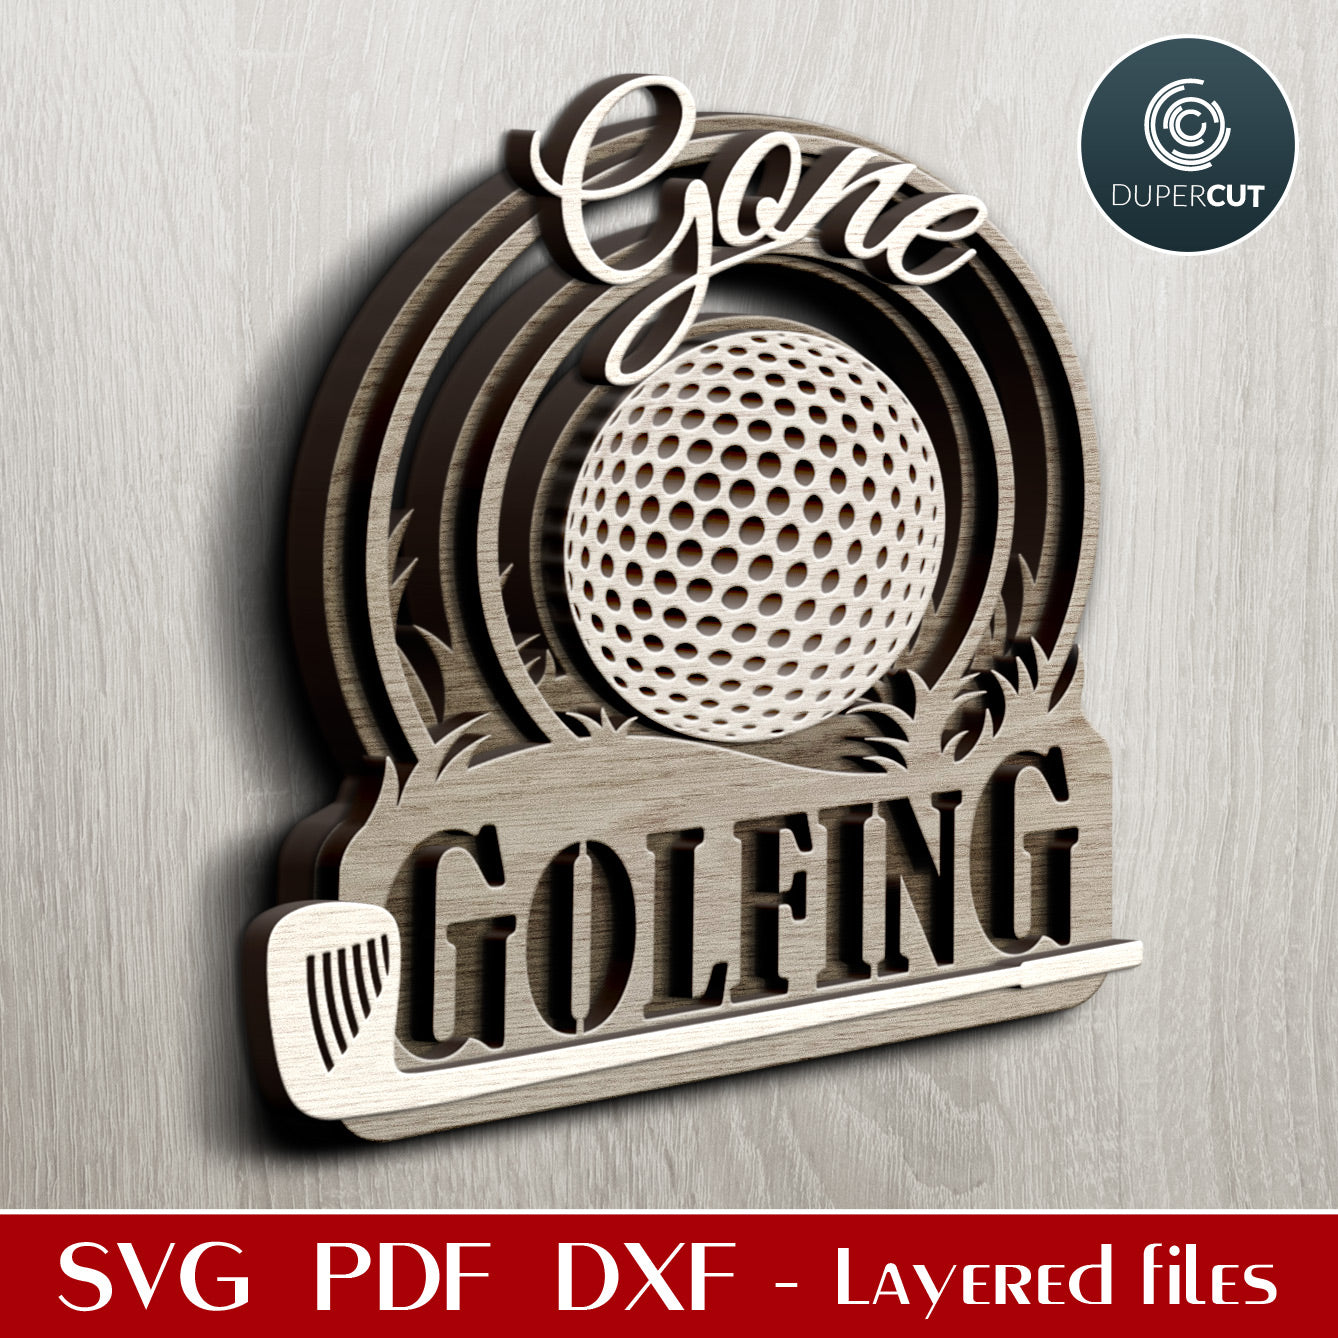 Gone Golfing layered sign template SVG DXF vector files for laser cut machines Glowforge, Xtool, Cricut by www.dupercut.com